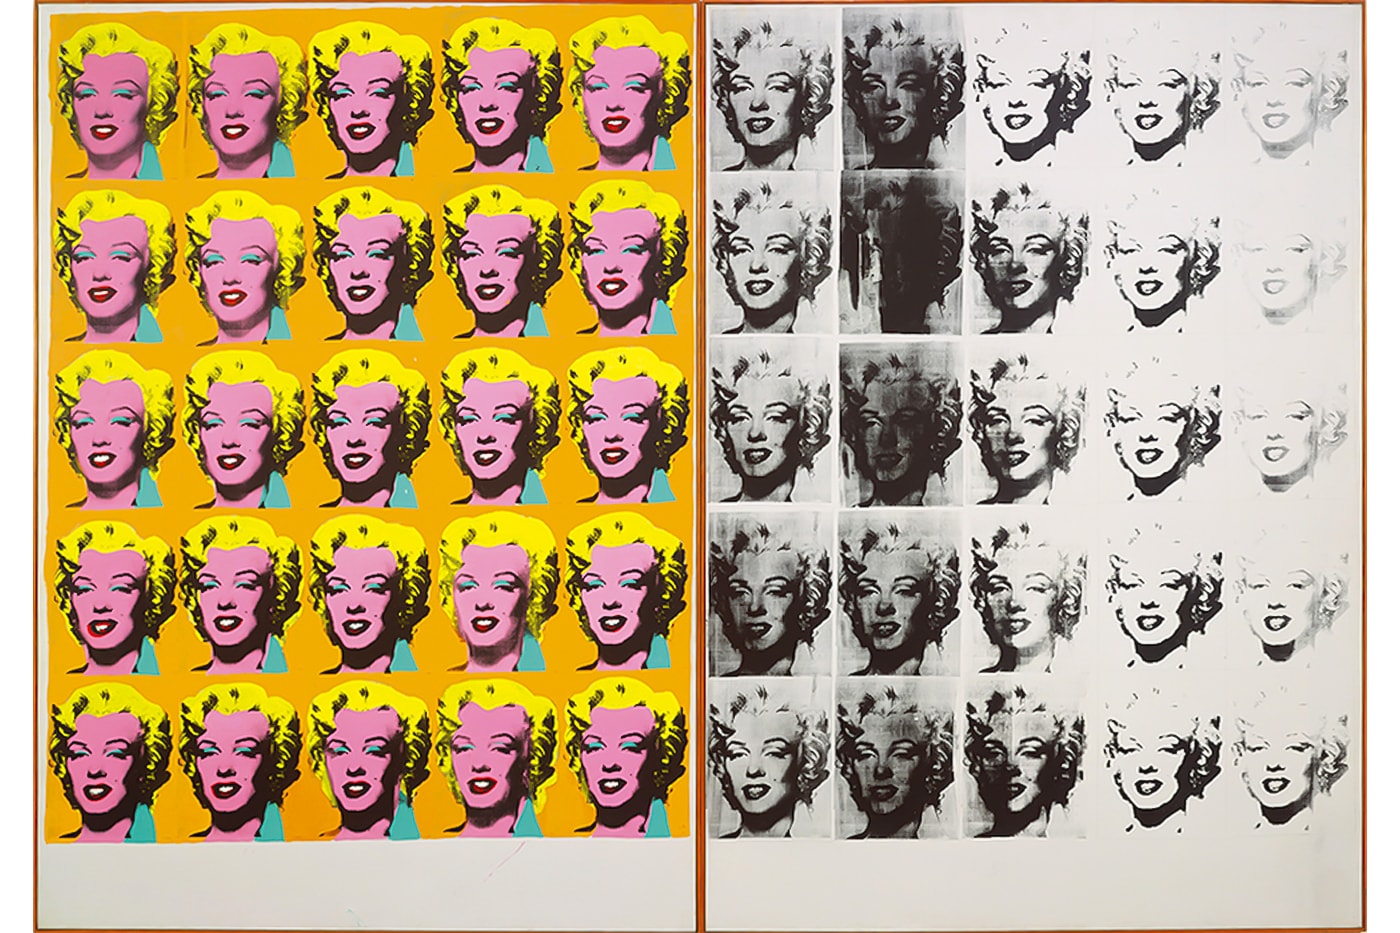 Andy Warhol From A to B and Back Again SFMOMA san francisco museum of modern art contemporary exhibition gallery artist pop art abstract expressionism